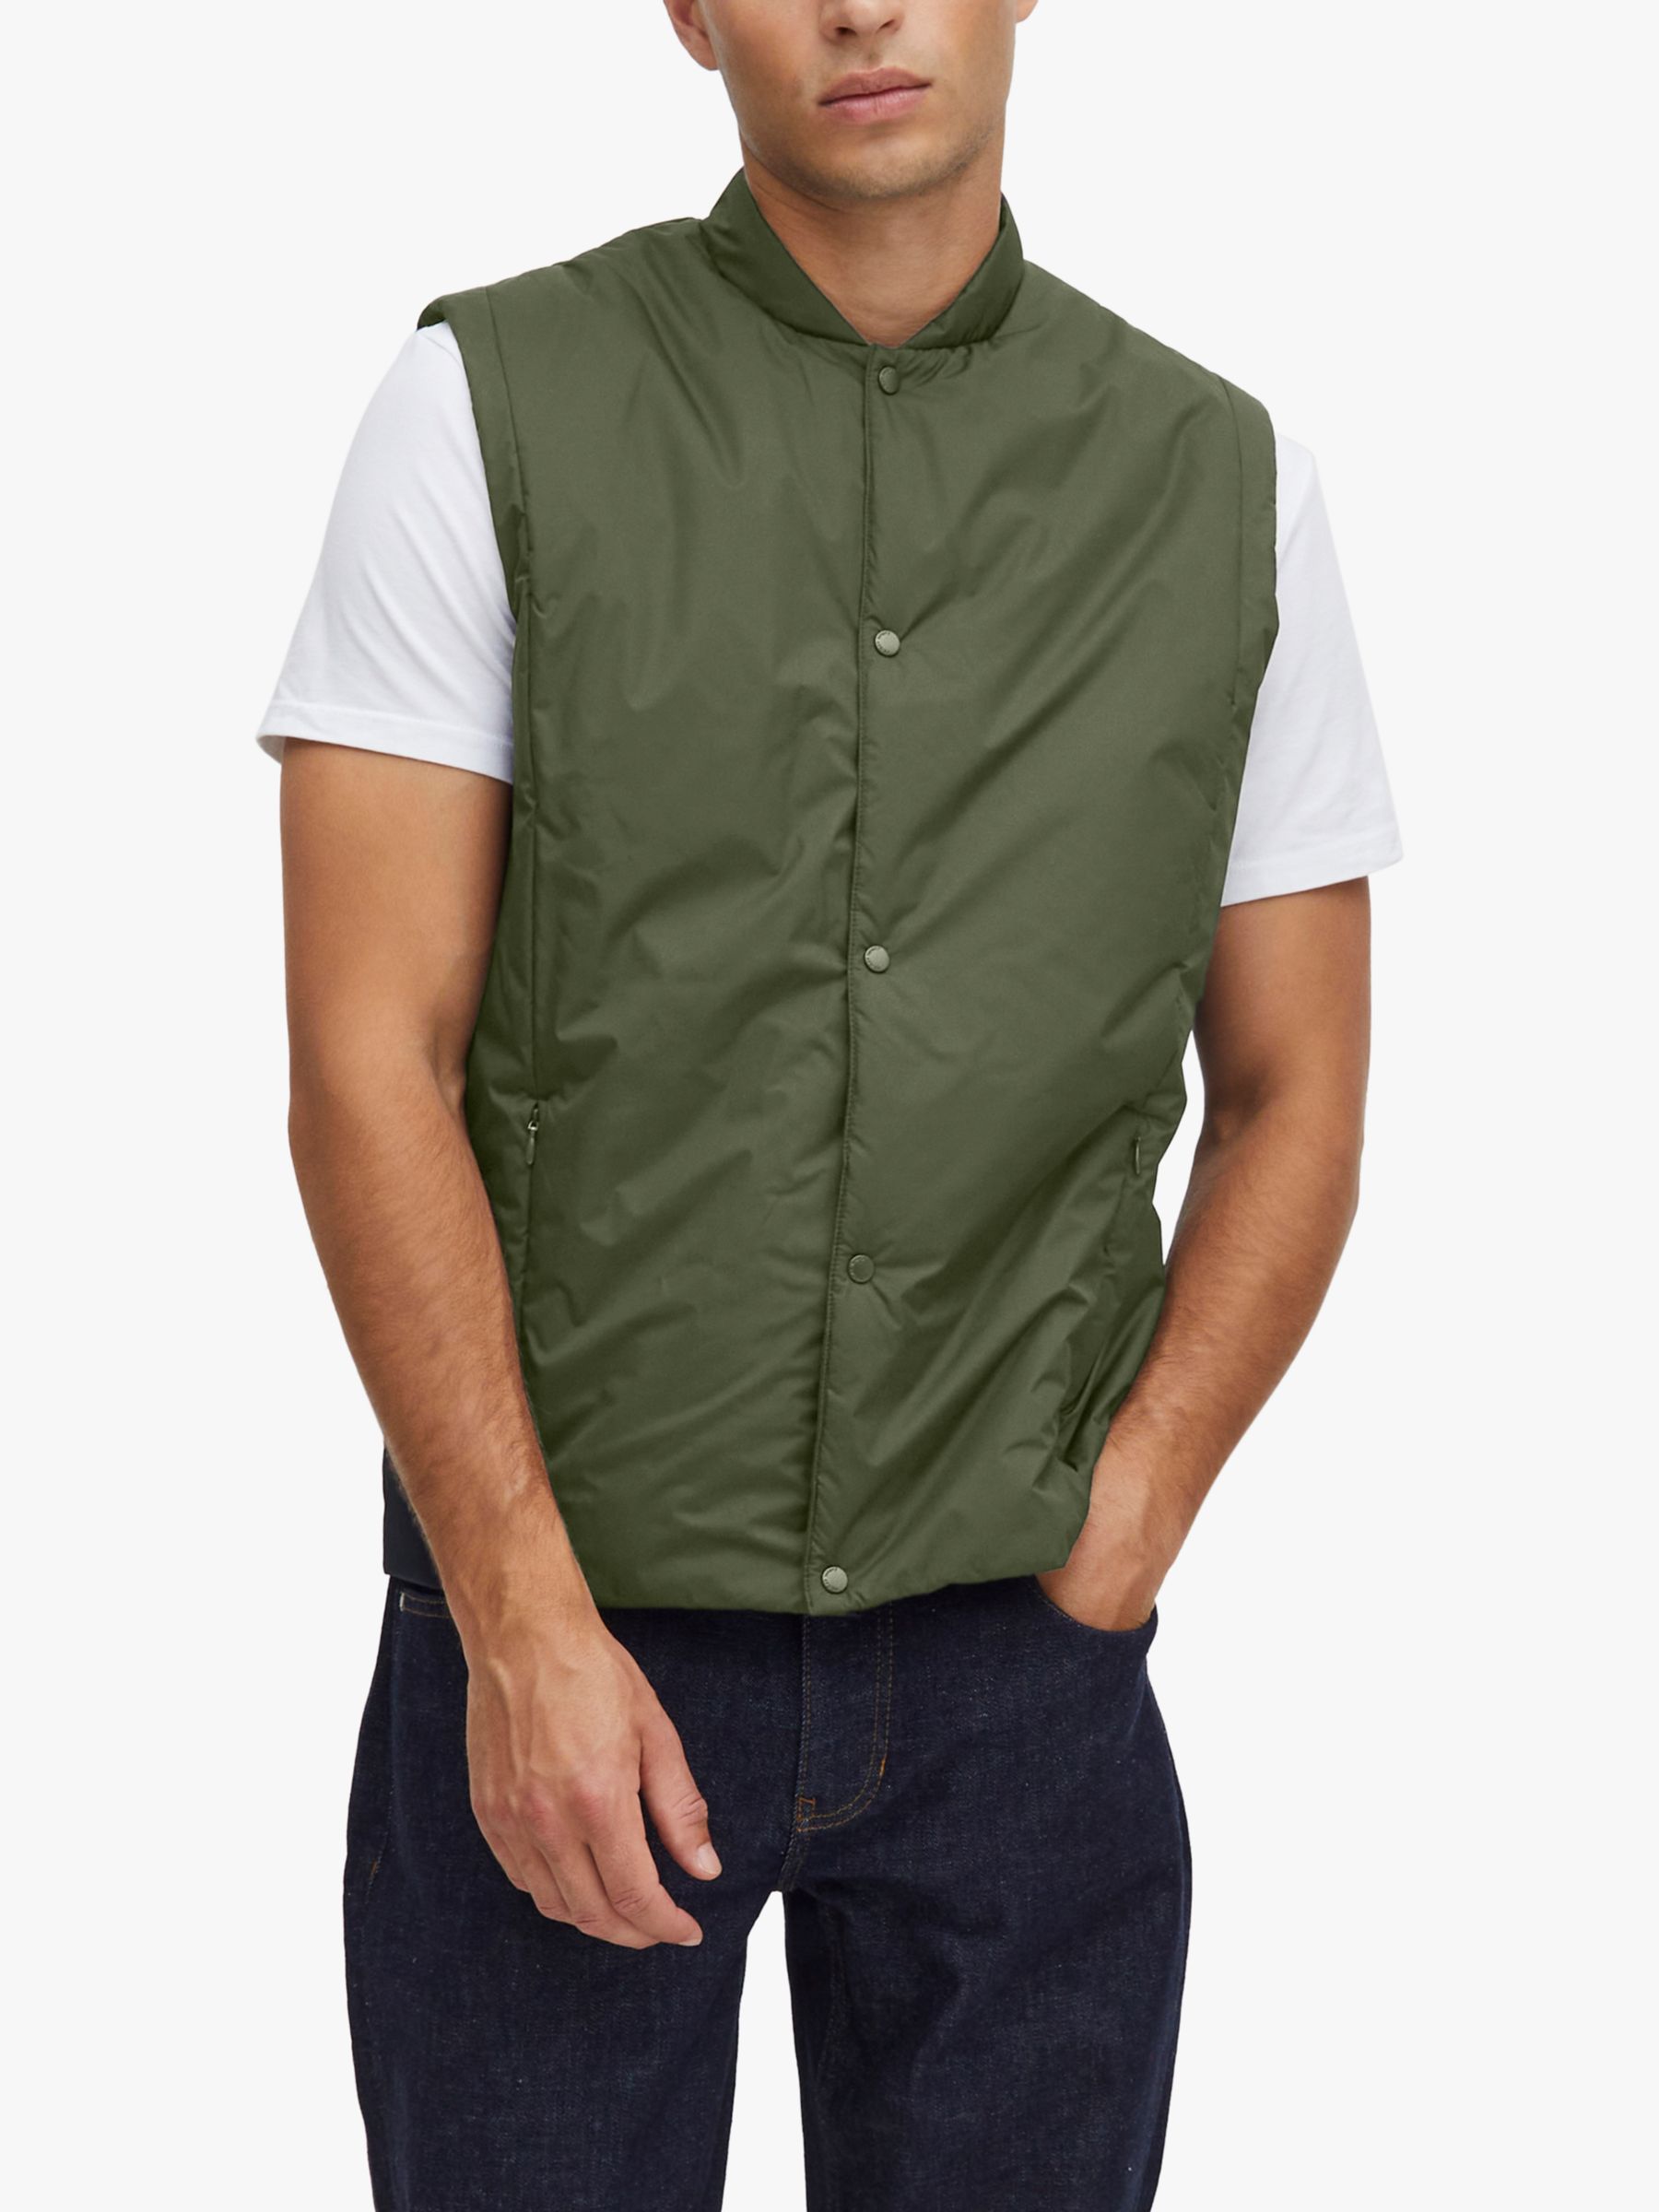 Buy Casual Friday Oates Thinsulate Gilet Online at johnlewis.com